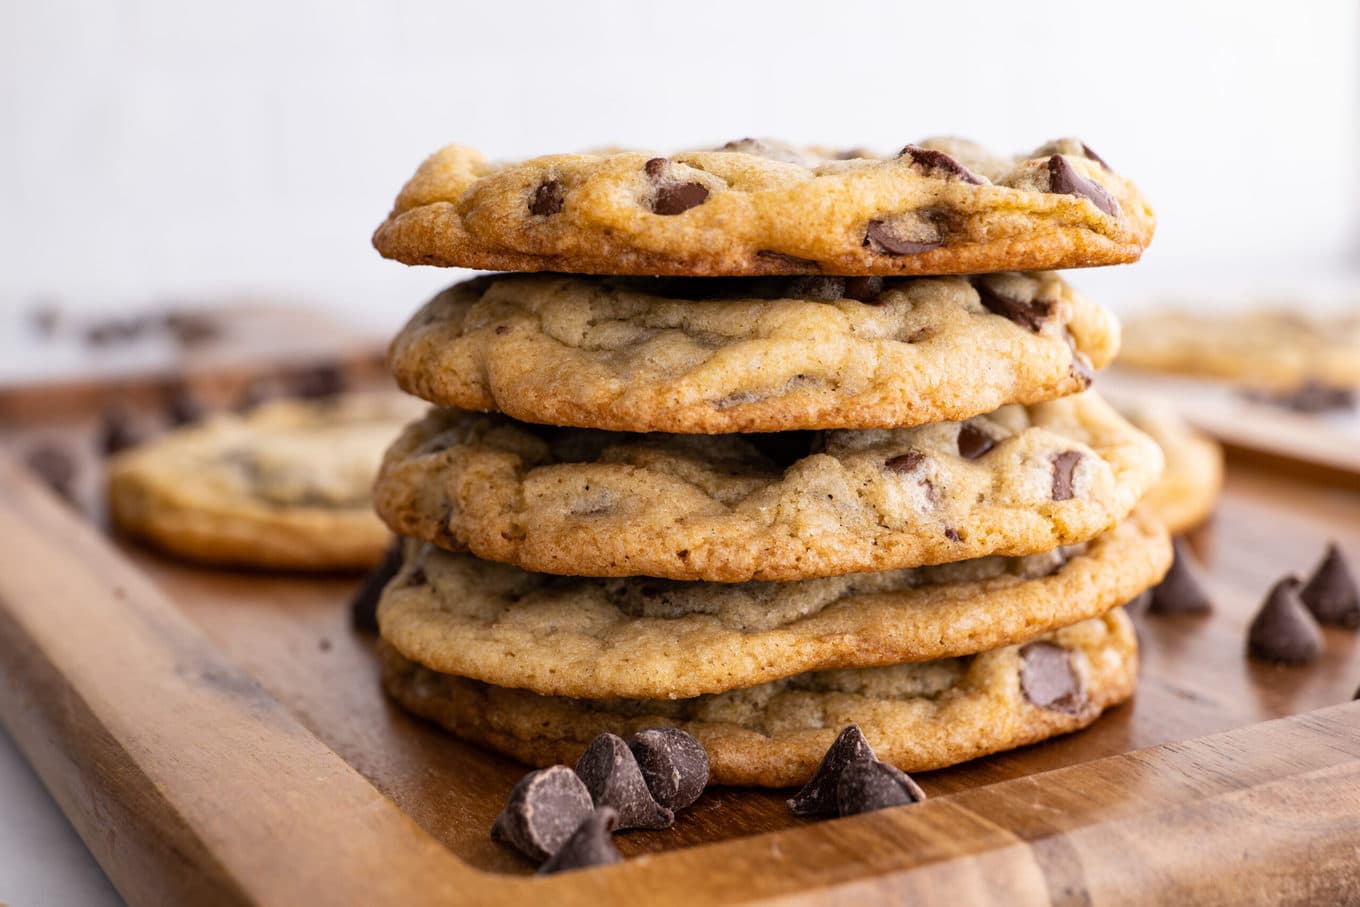 Chocolate Chip Cookies stacked on board with chocolate chips